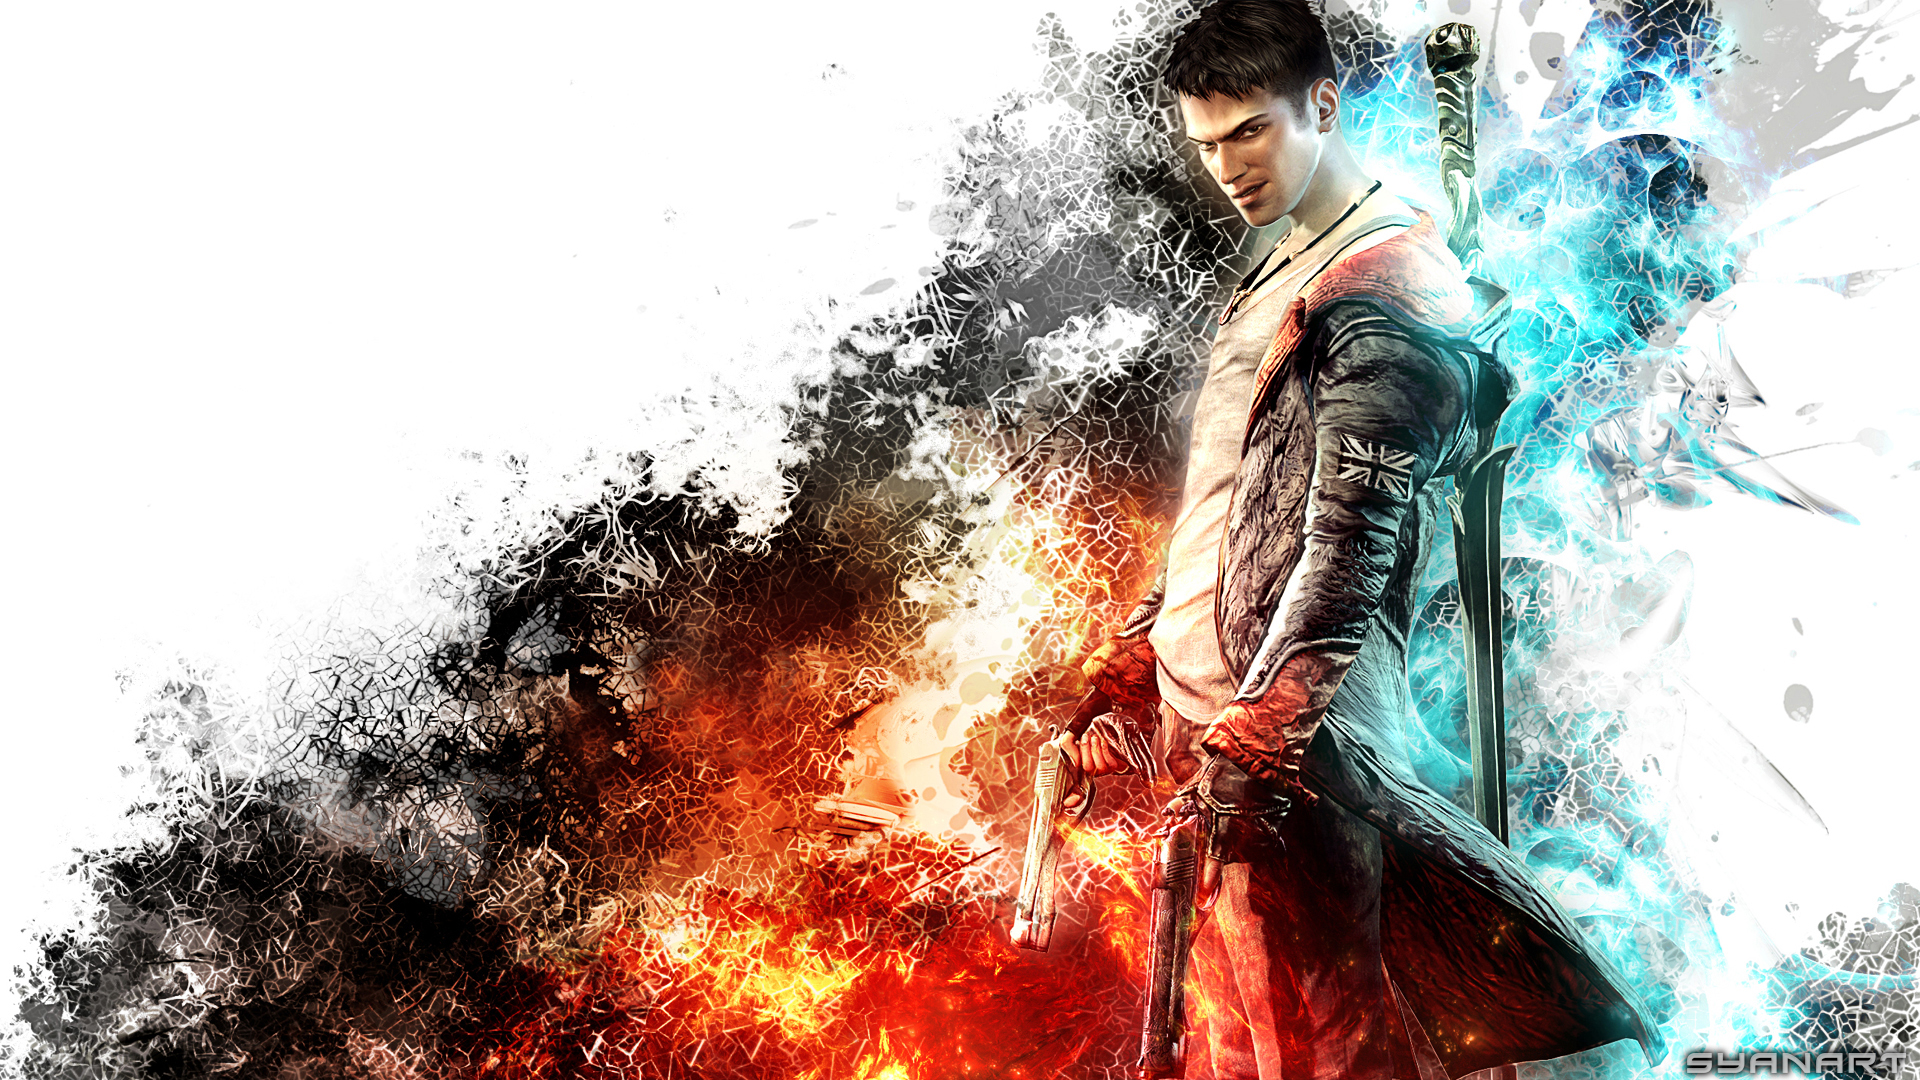 Handy-Wallpaper Devil May Cry, Computerspiele, Dante (Devil May Cry), Dmc: Devil May Cry kostenlos herunterladen.